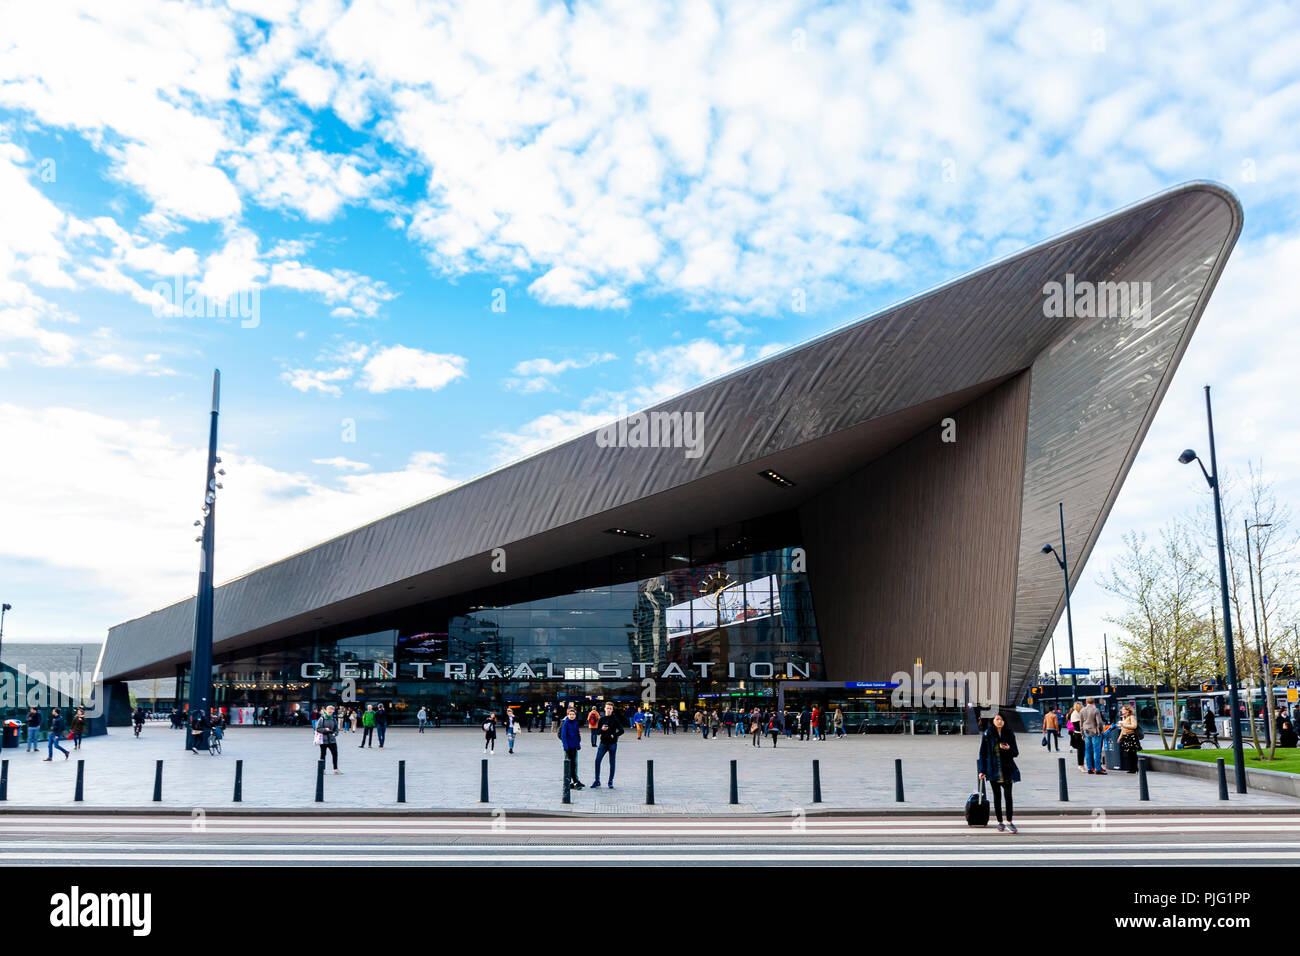 ROTTERDAM, Netherlands - April 15 2017: Rotterdam Centraal Rail Station modern architecture landscape view with commuters Stock Photo